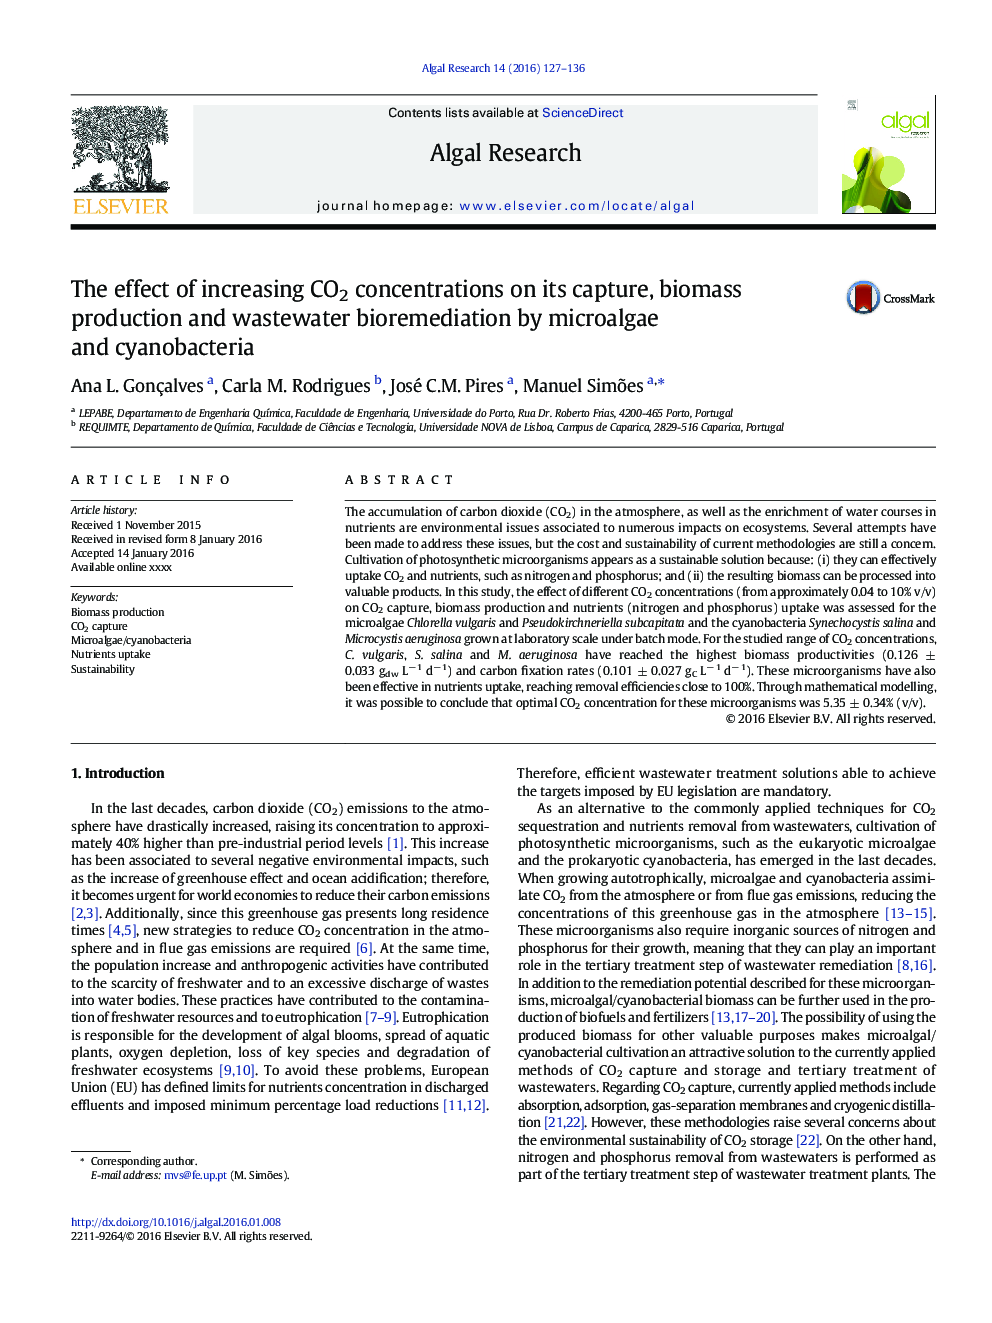 The effect of increasing CO2 concentrations on its capture, biomass production and wastewater bioremediation by microalgae and cyanobacteria